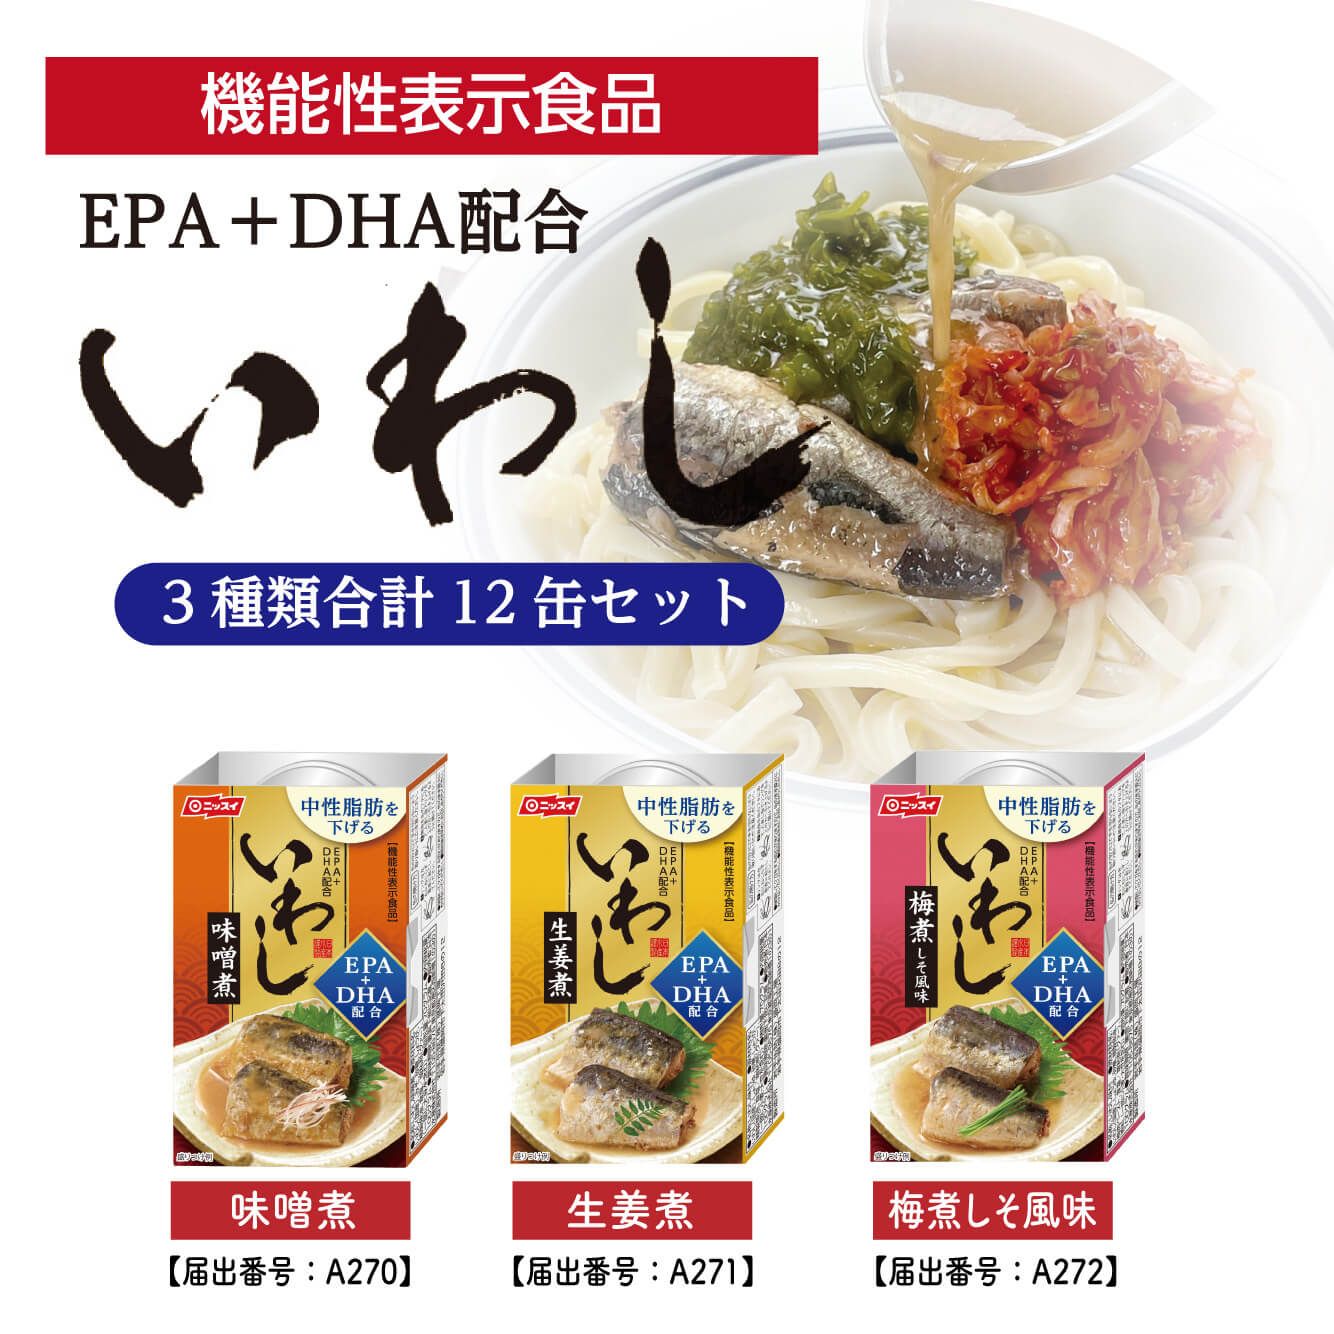 EPA+DHA 配合 いわし缶詰セット